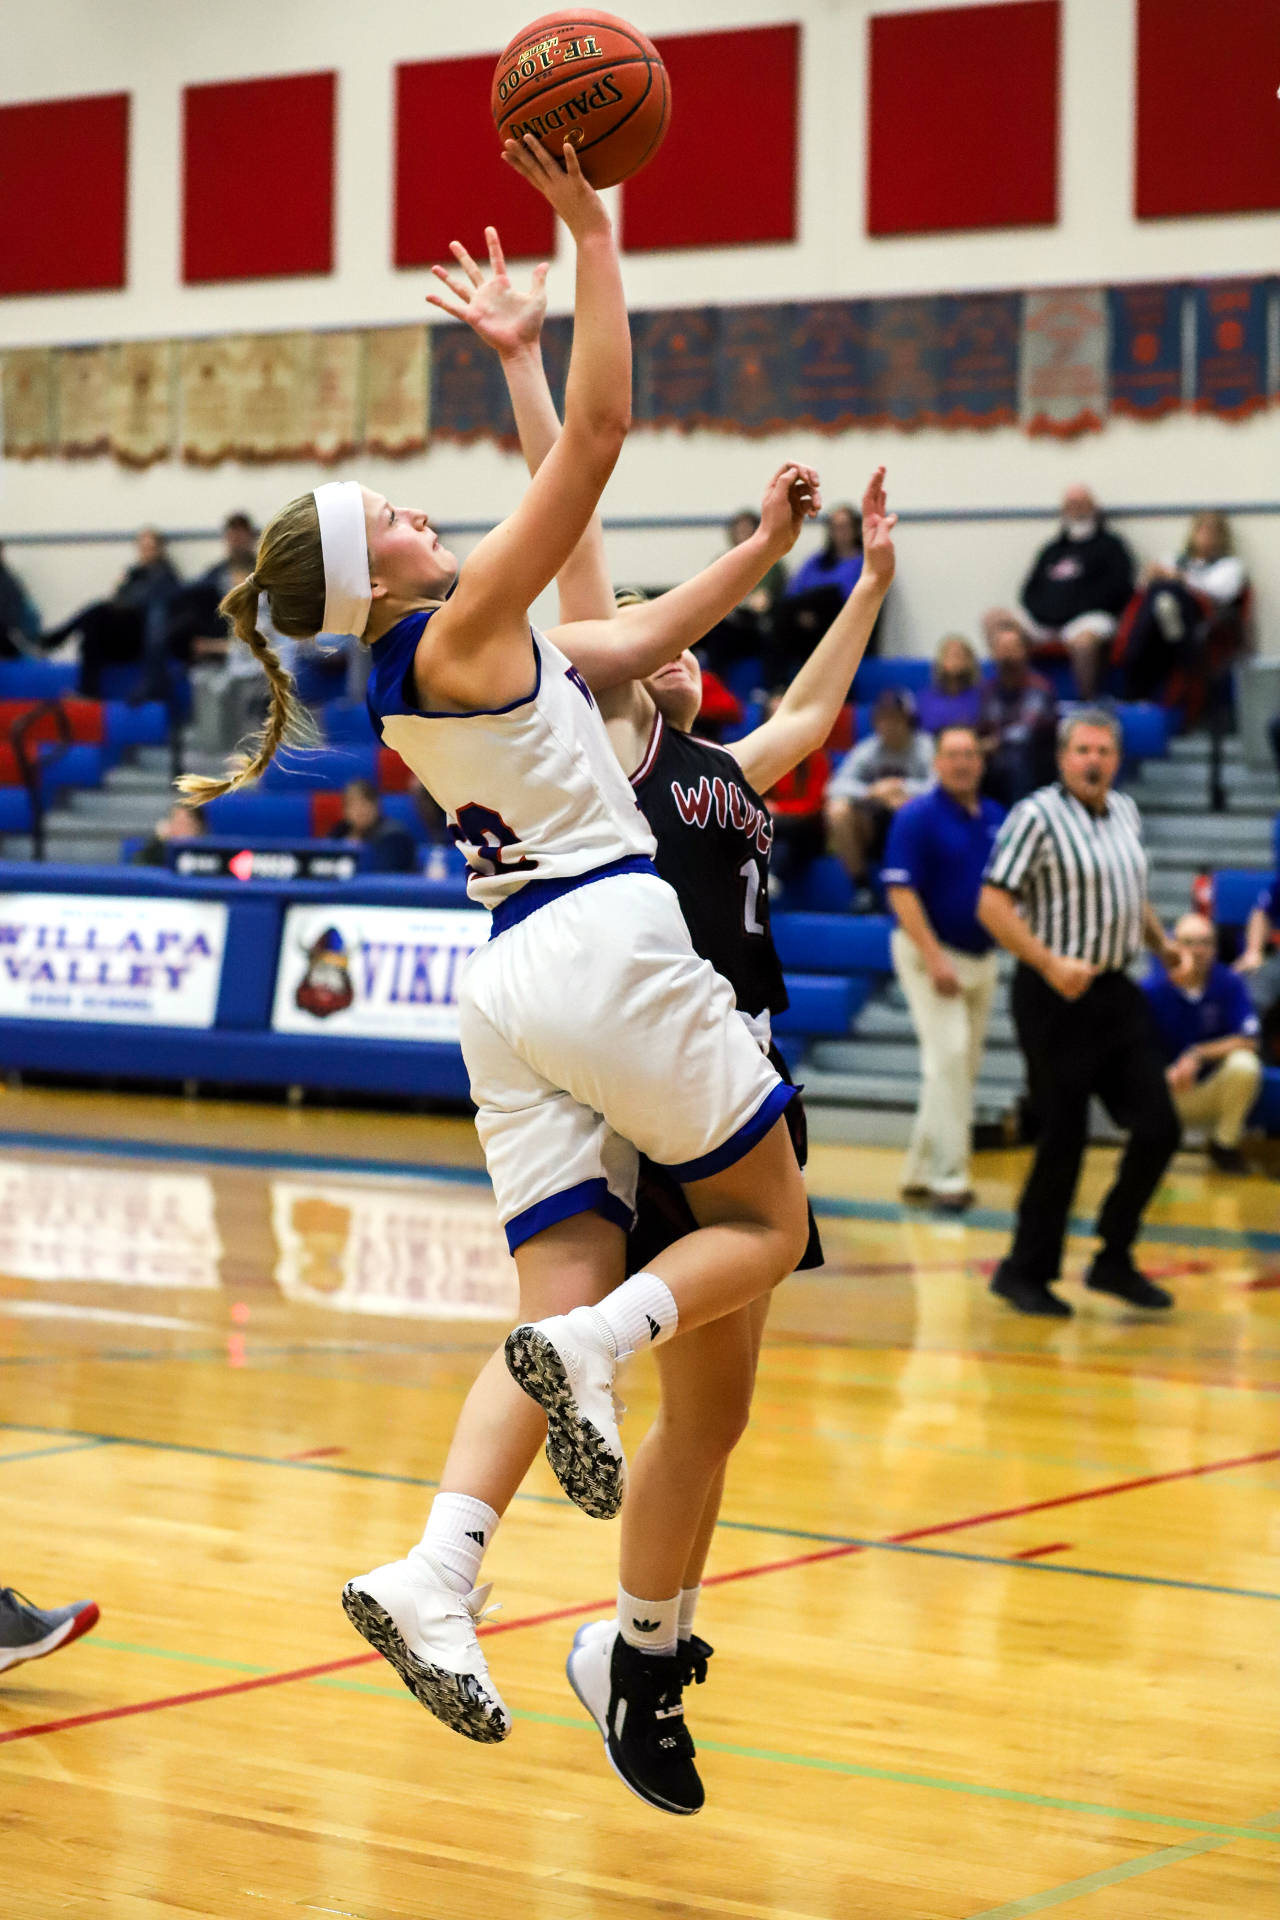 Willapa Valley’s Katie Adkins scores two points against Ocosta on Wednesday in Menlo. Adkins scored 11 points and grabbed eight rebounds in the Vikings’ 50-17 win over the Wildcats. (Photo by Larry Bale)